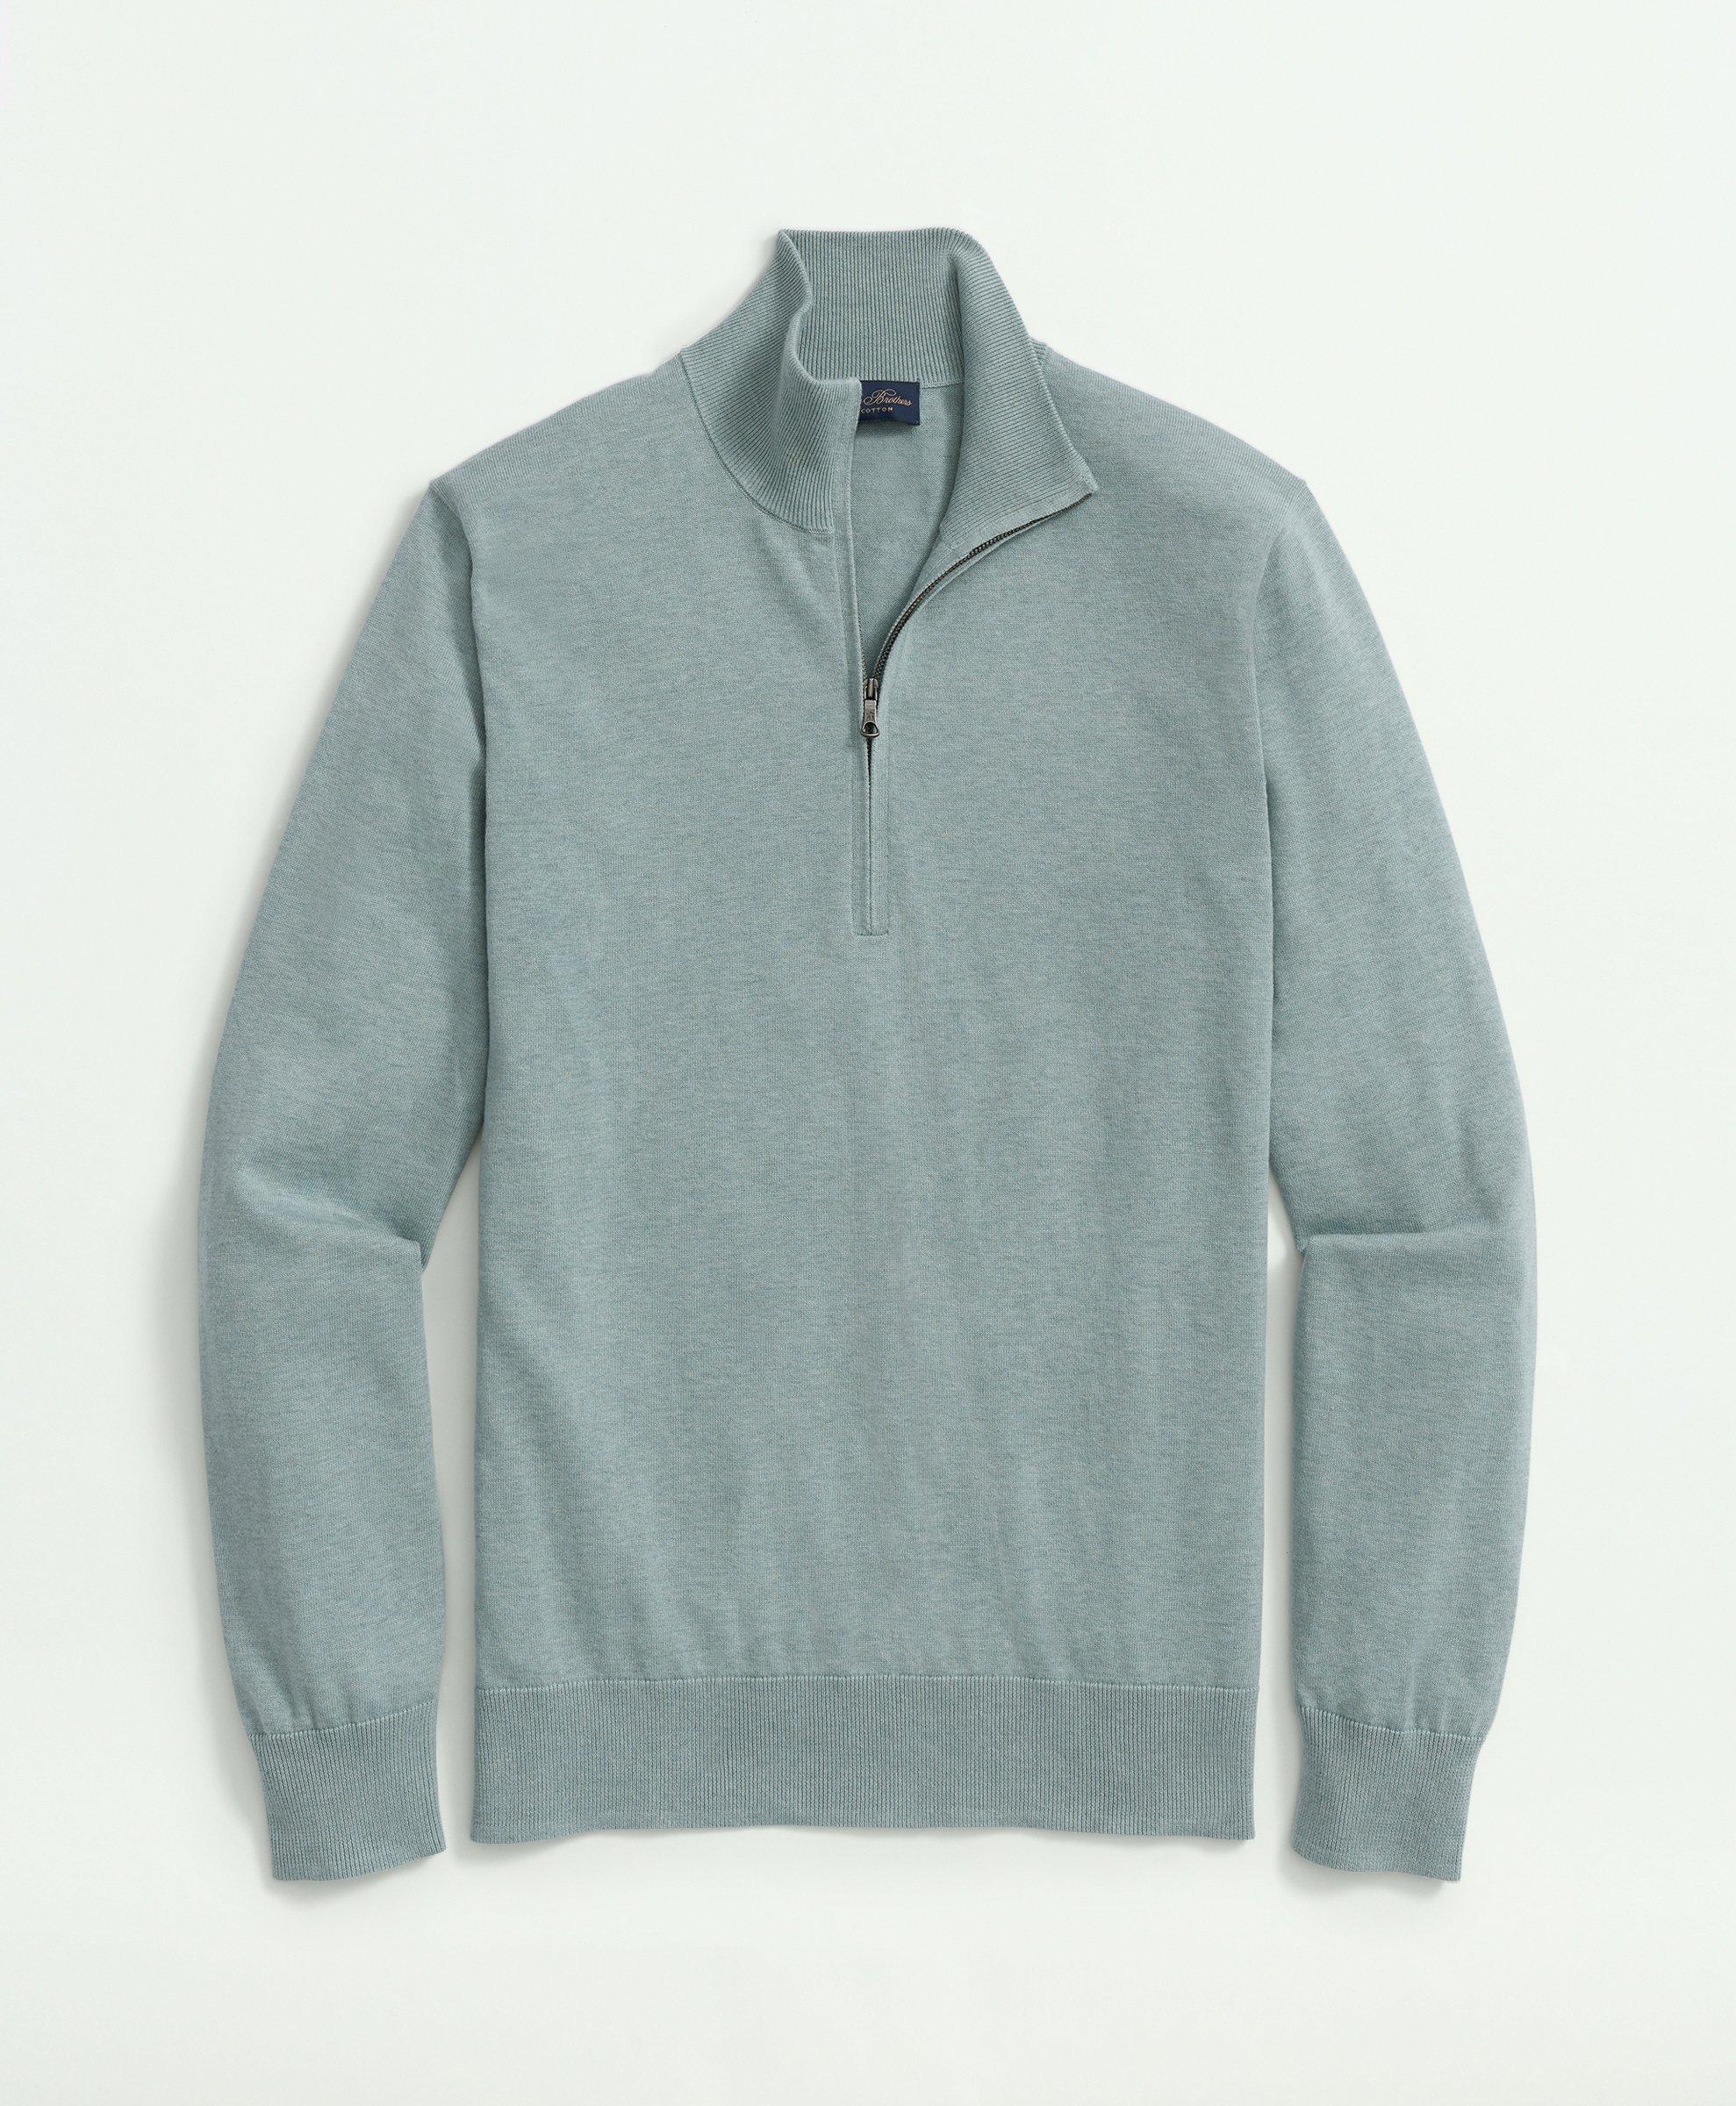 Mens Cotton Cashmere 1/4 Zip Jumper in Grey - Oxford Shirt Co.